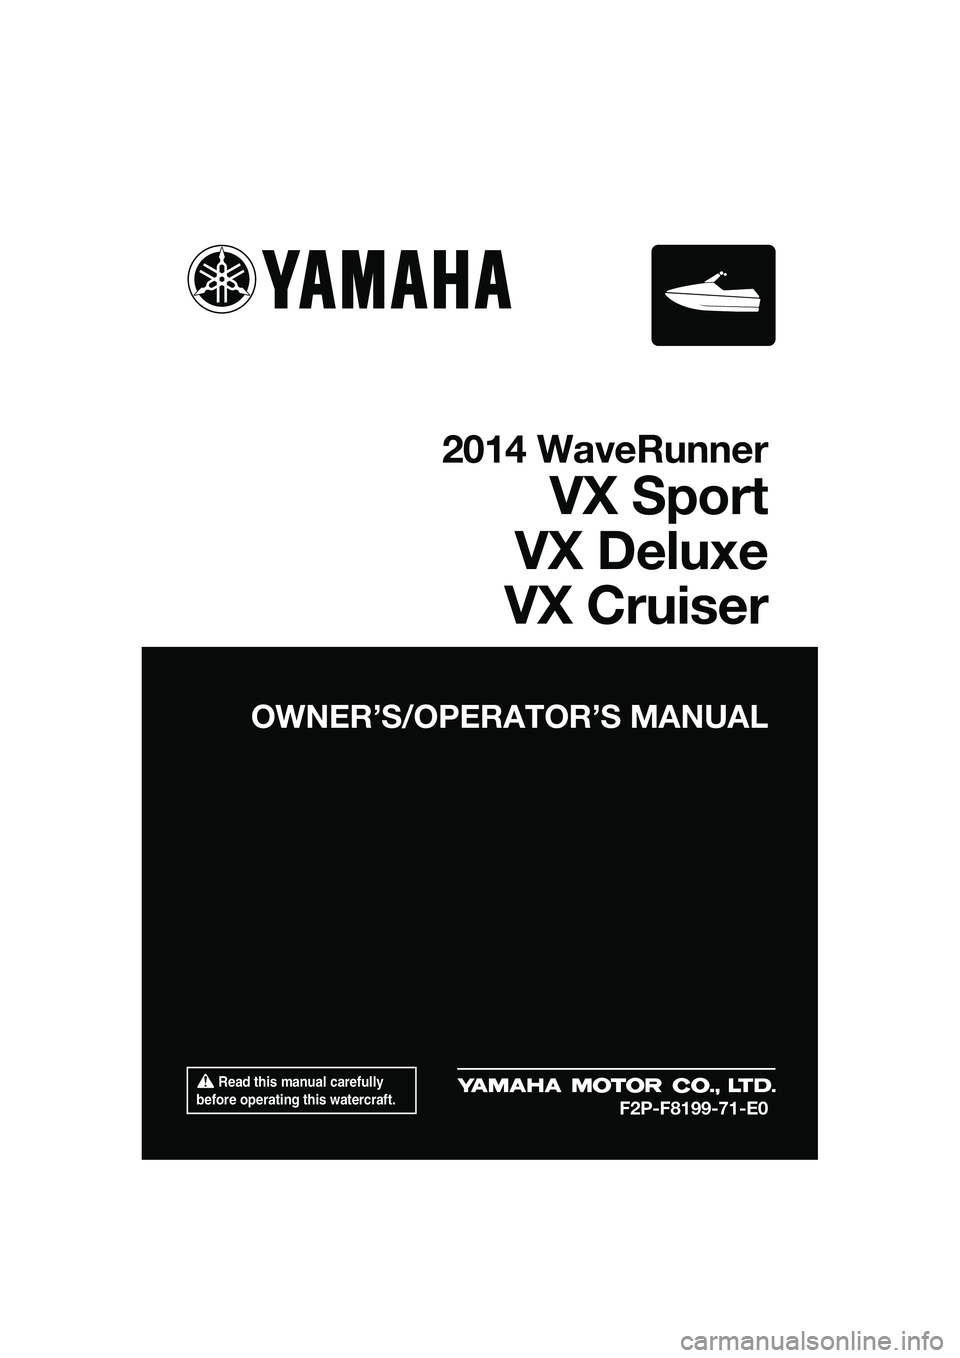 YAMAHA VX DELUXE 2014  Owners Manual  Read this manual carefully 
before operating this watercraft.
OWNER’S/OPERAT OR’S MANUAL
2014 WaveRunner
VX Sport
VX Deluxe
VX Cruiser
F2P-F8199-71-E0
UF2P71E0.book  Page 1  Wednesday, July 10, 2